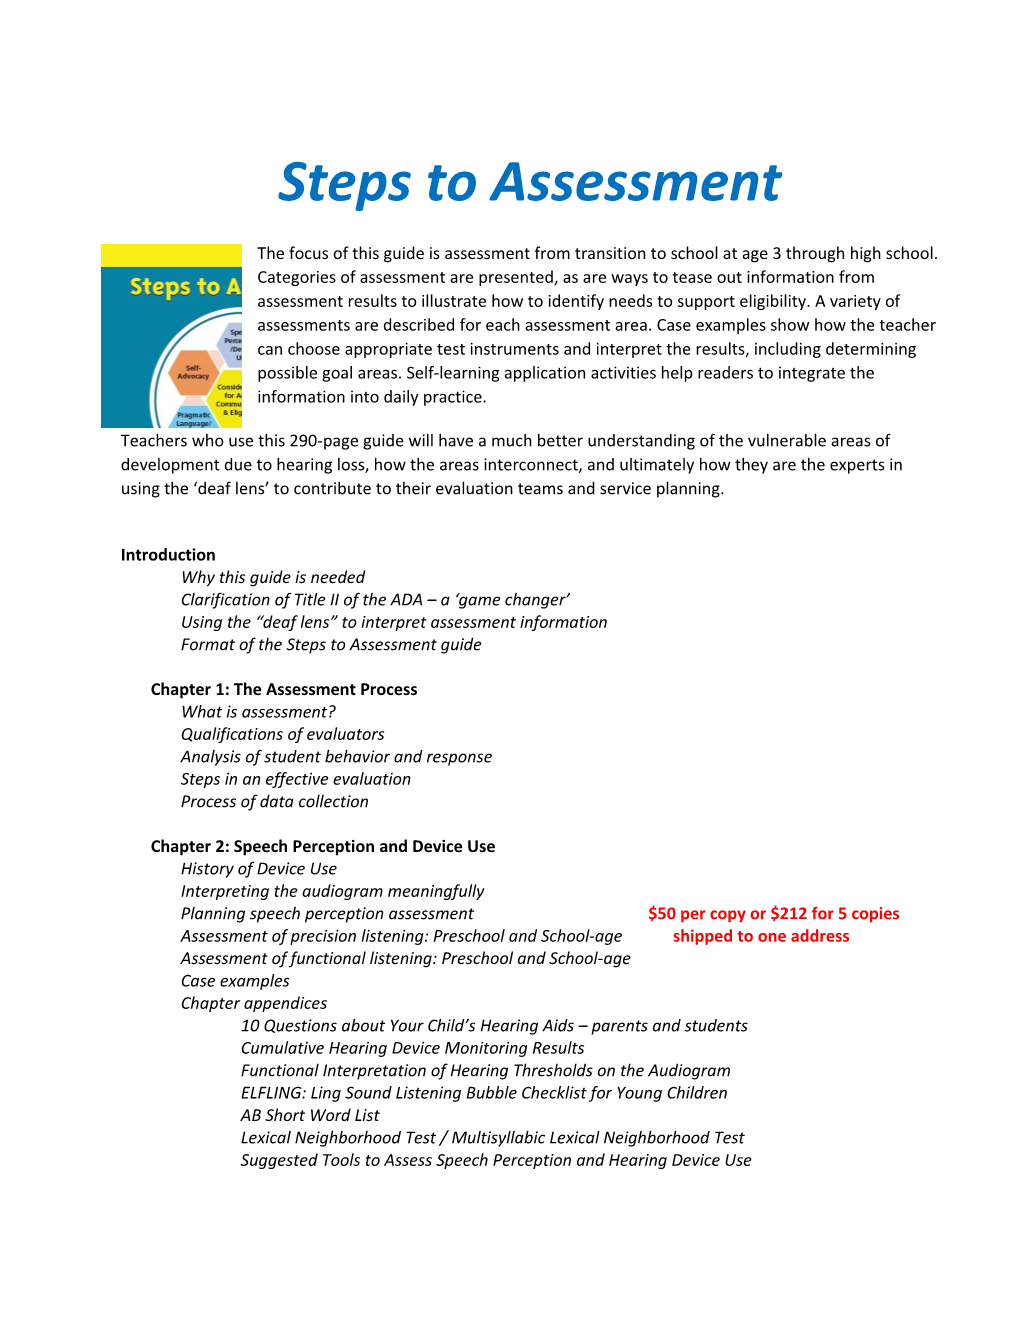 Steps to Assessment